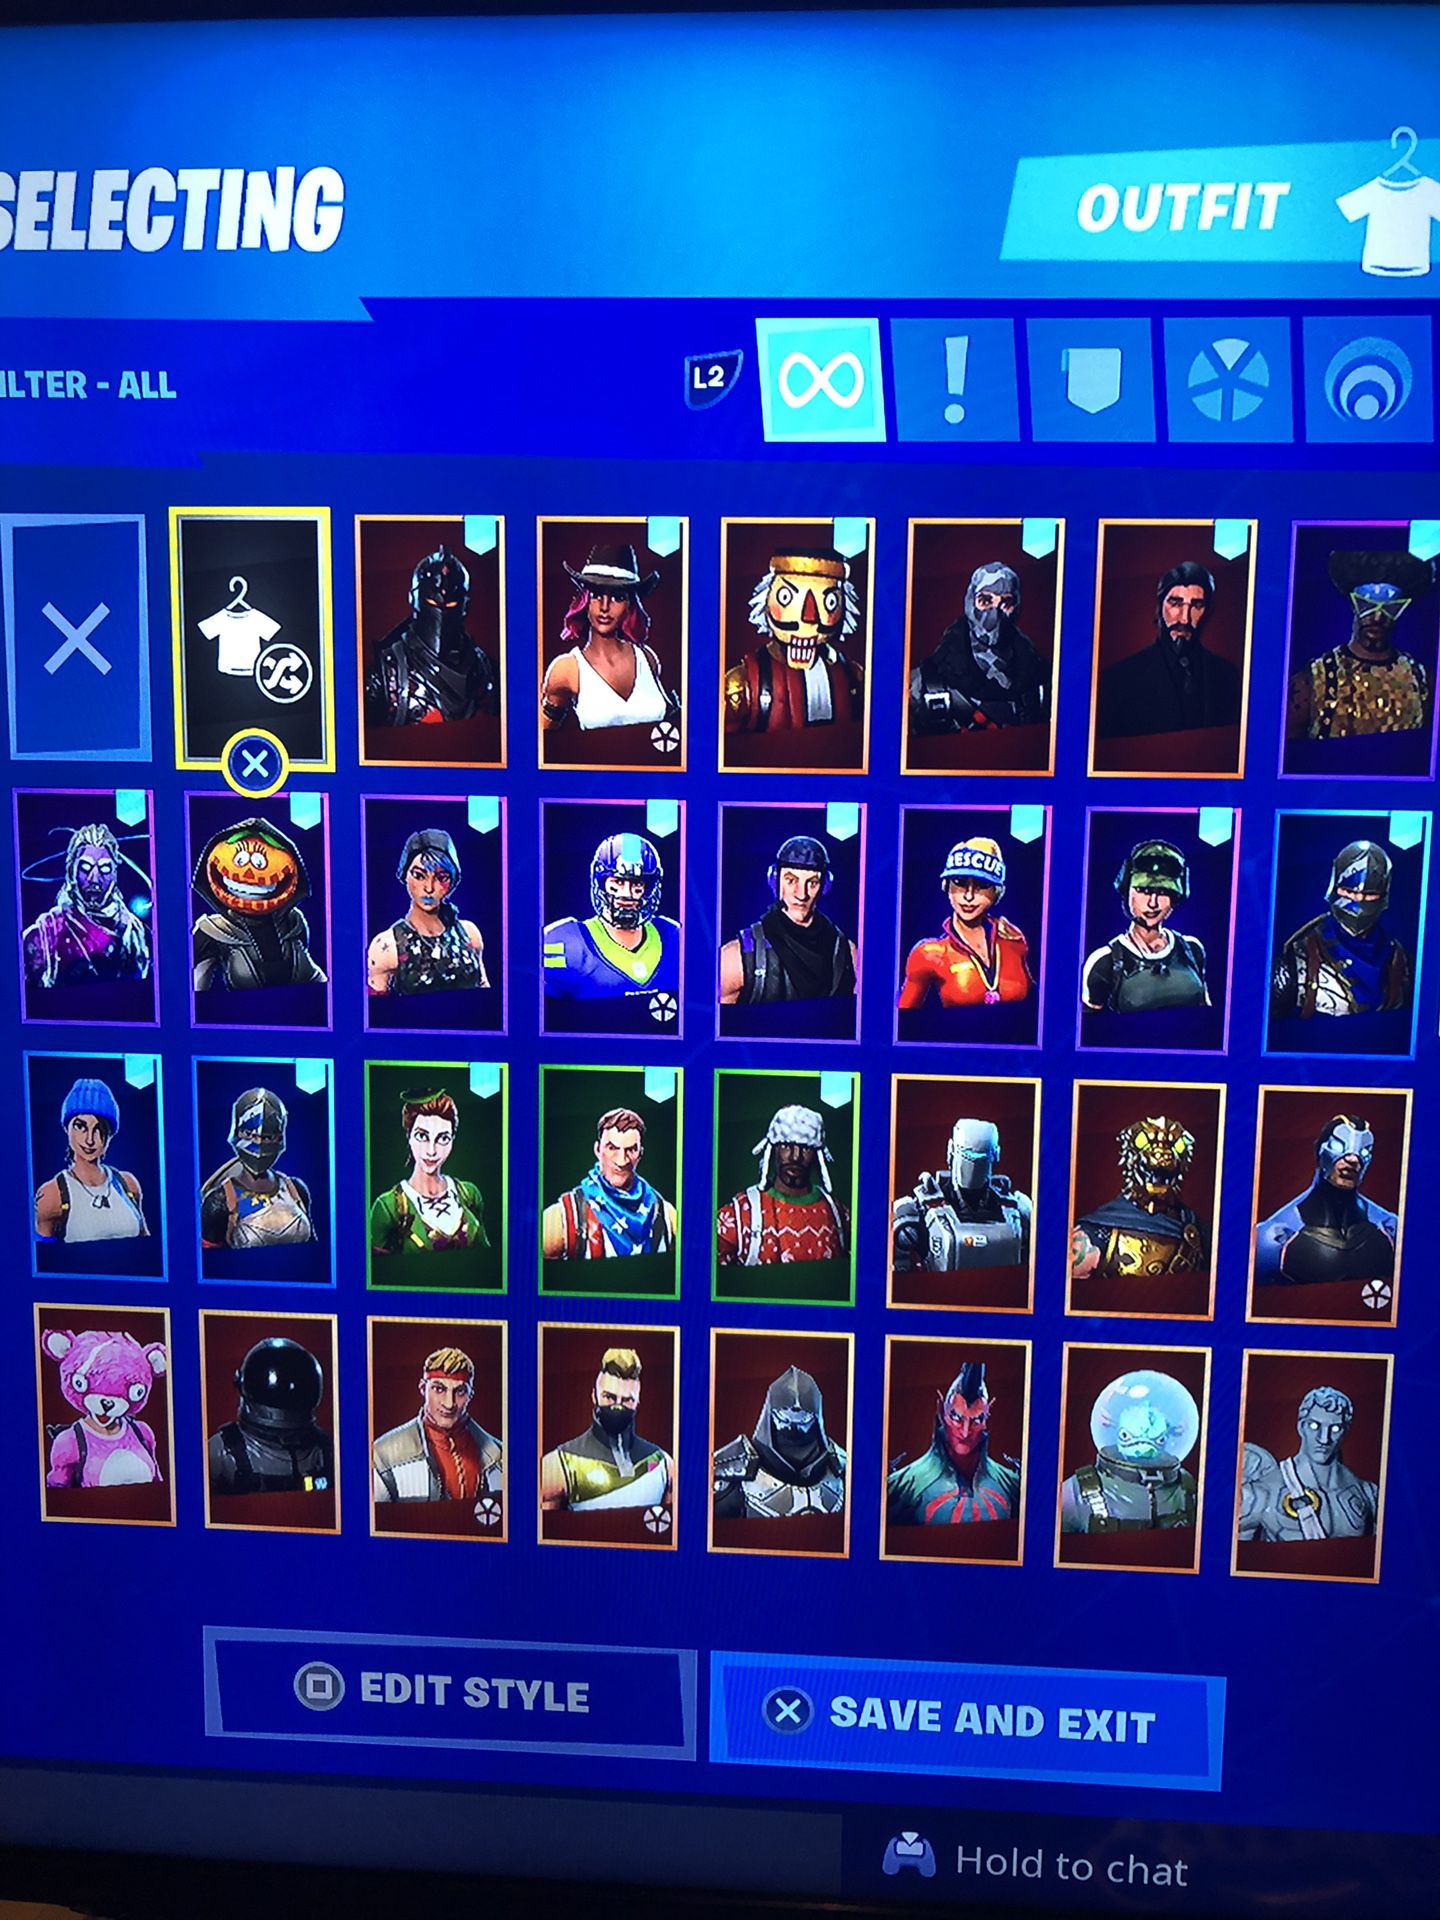 Account for sell